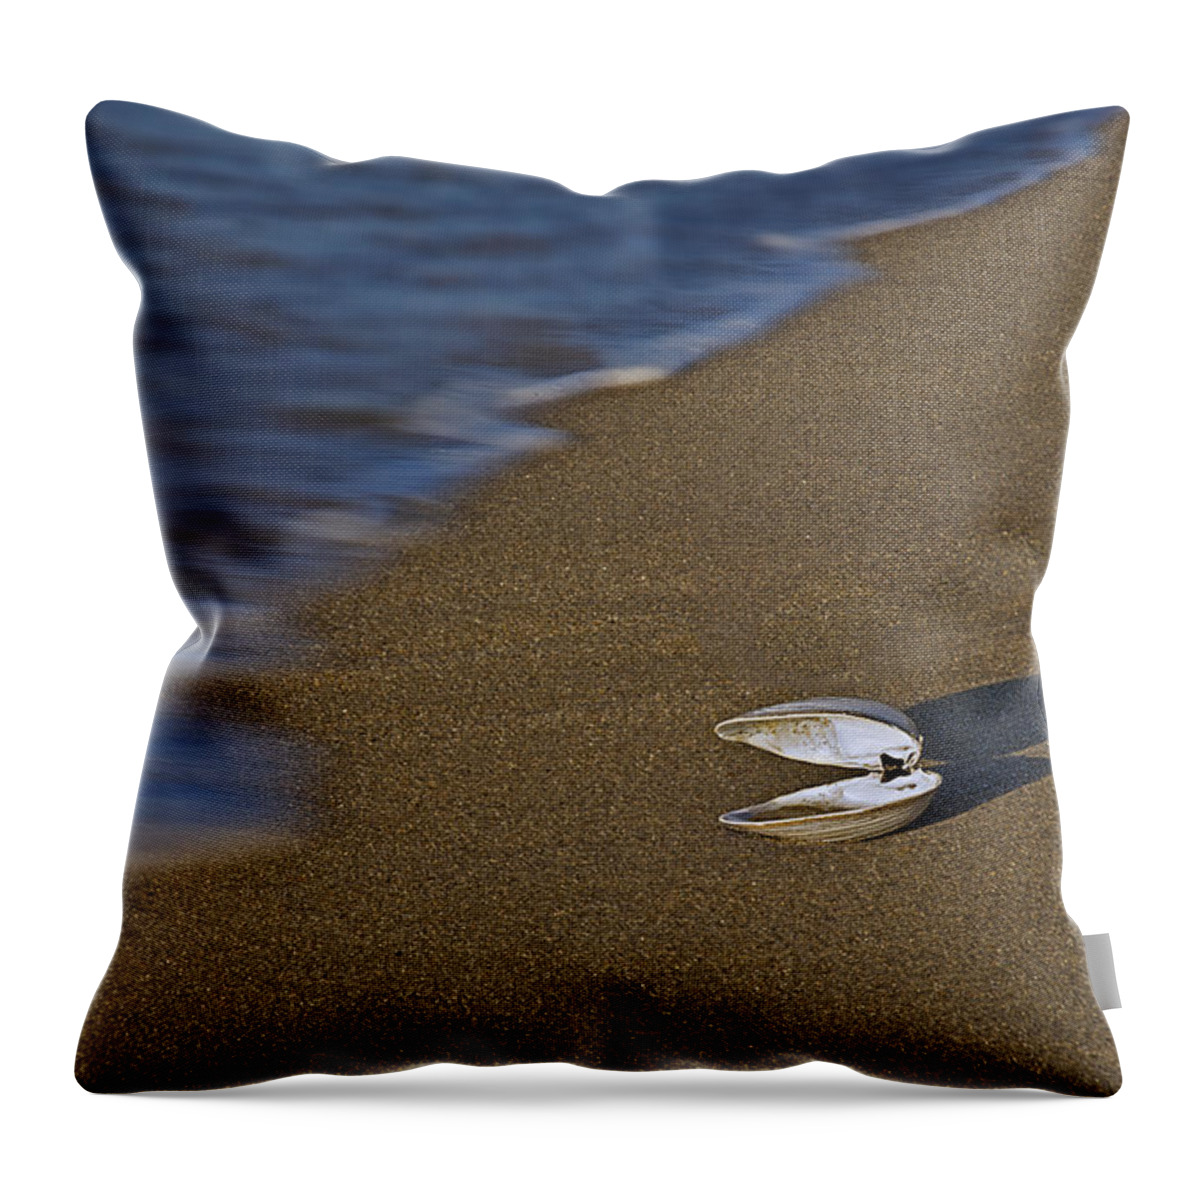 Sea Shell Throw Pillow featuring the photograph Shell By The Shore by Susan Candelario